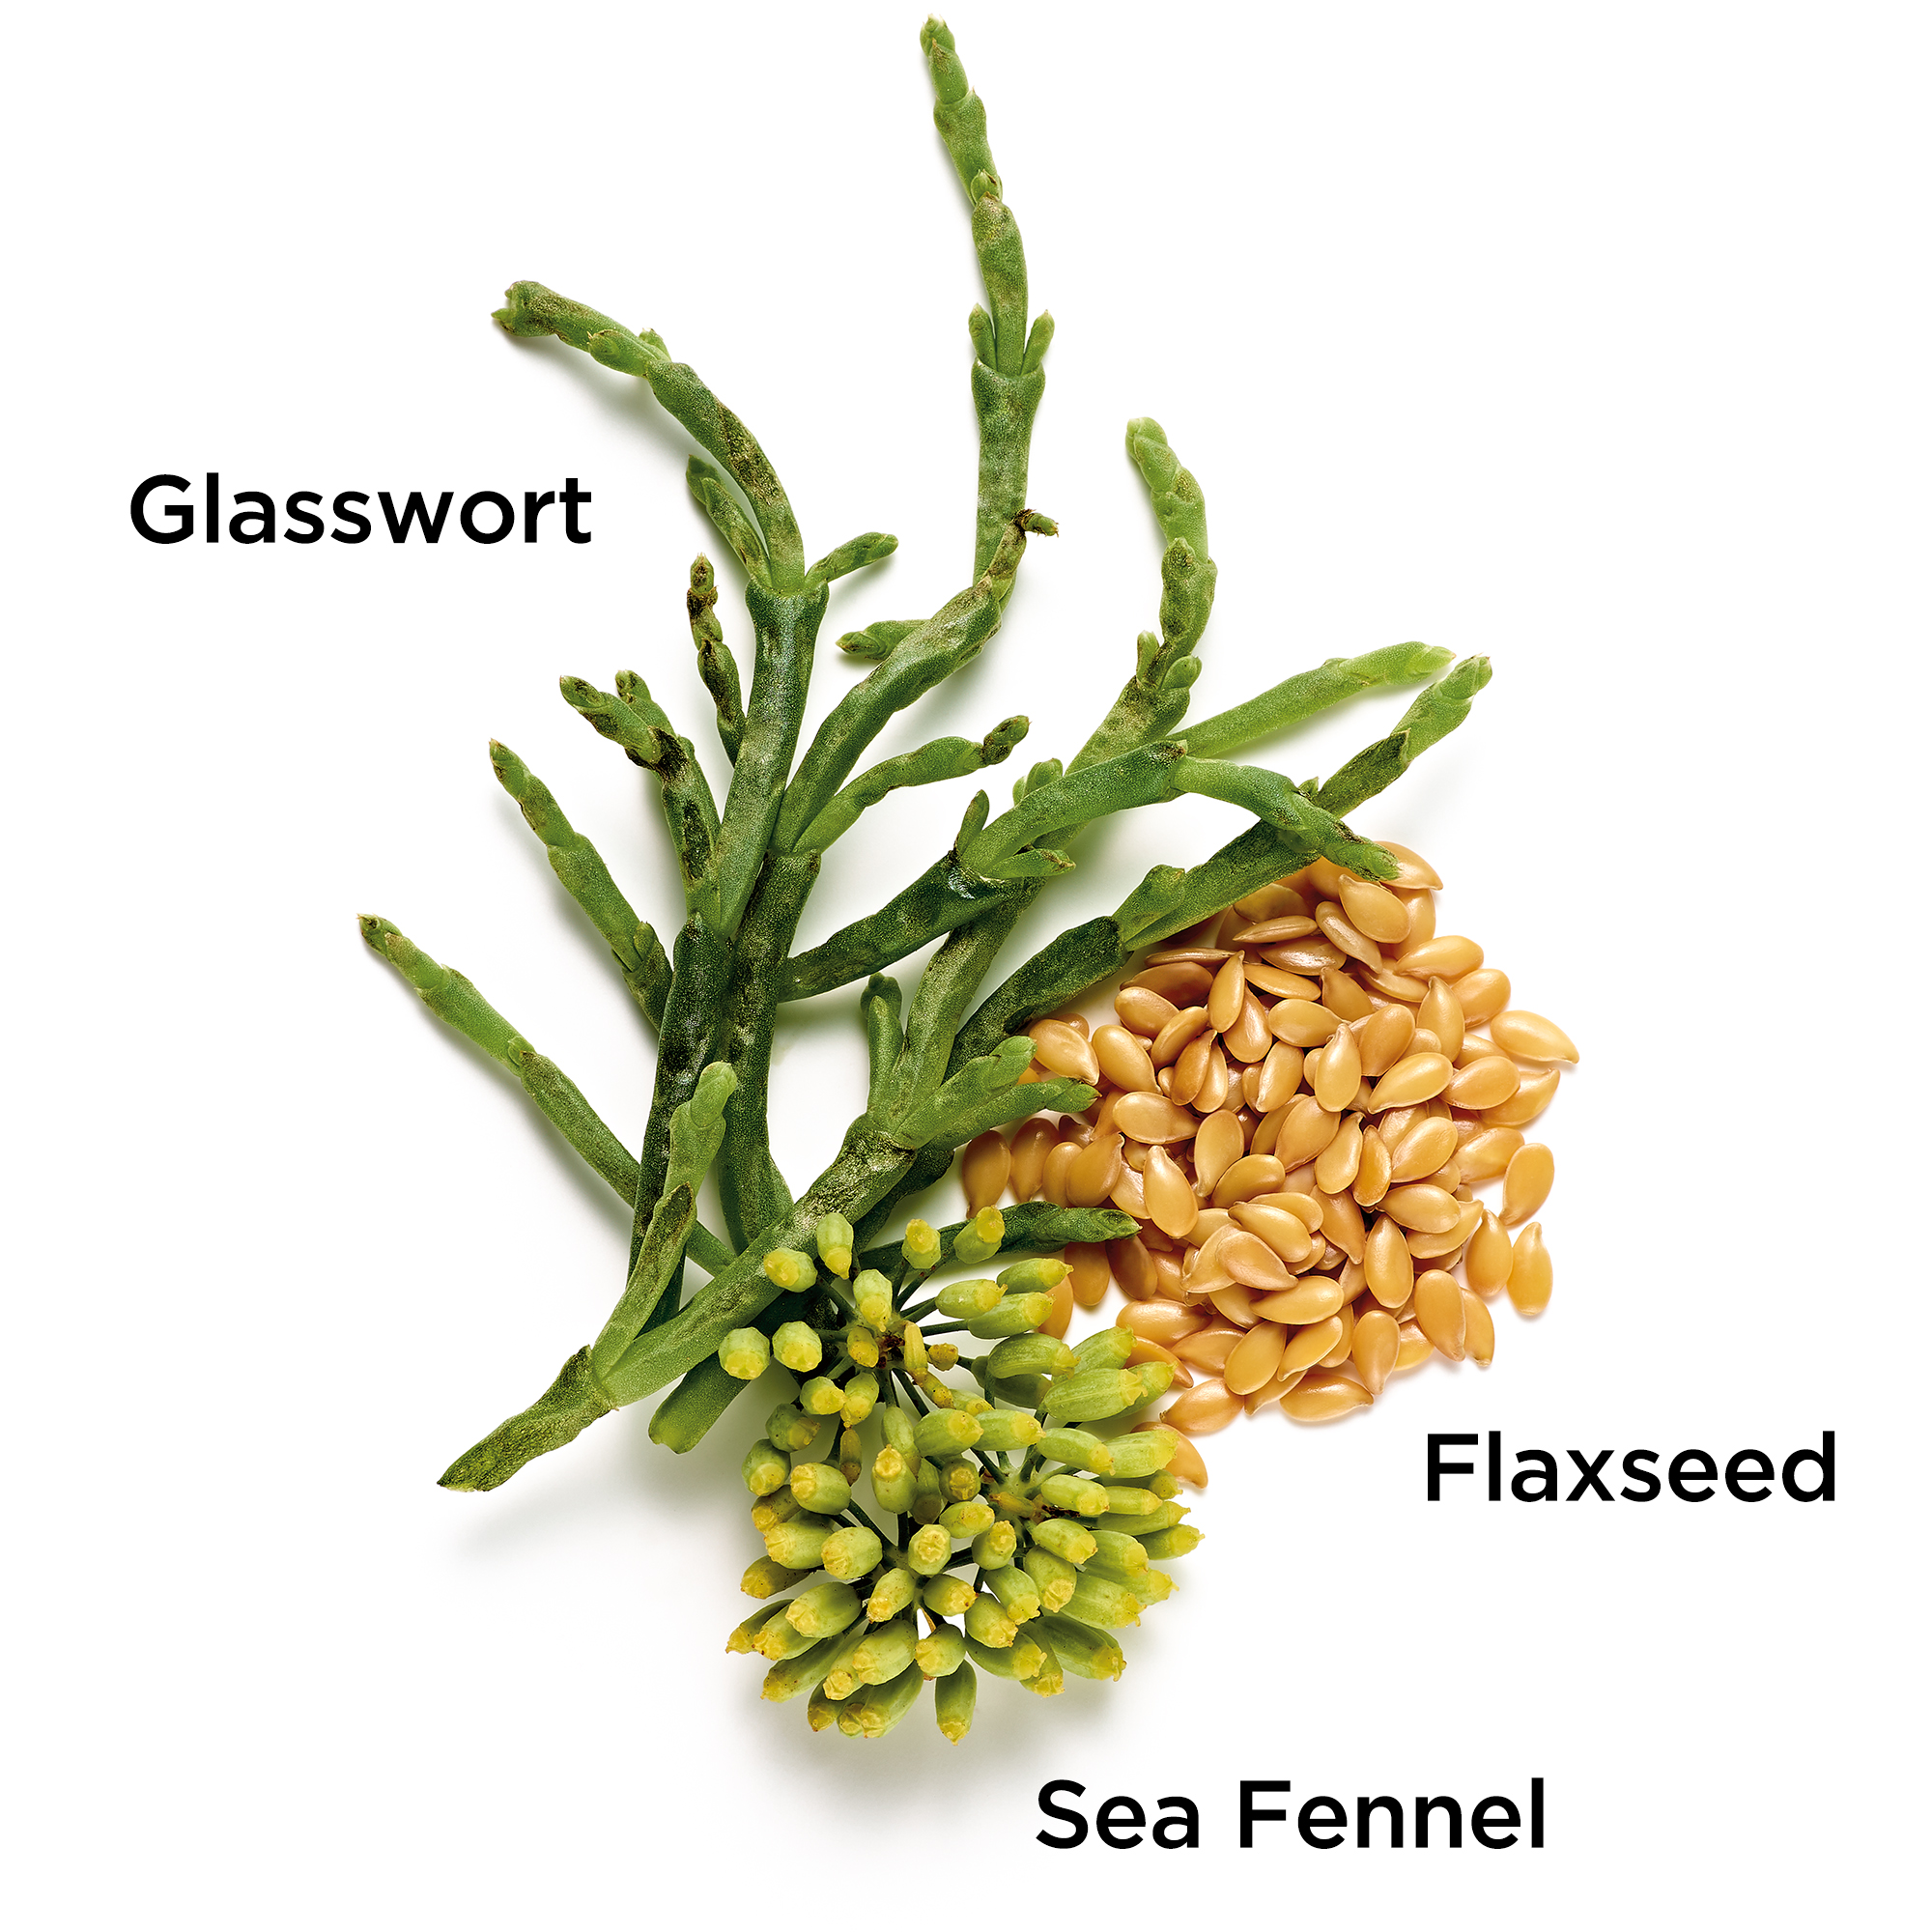 Superstart Booster Key Ingredients: Glasswort, Sea Fennel, and Flaxseed